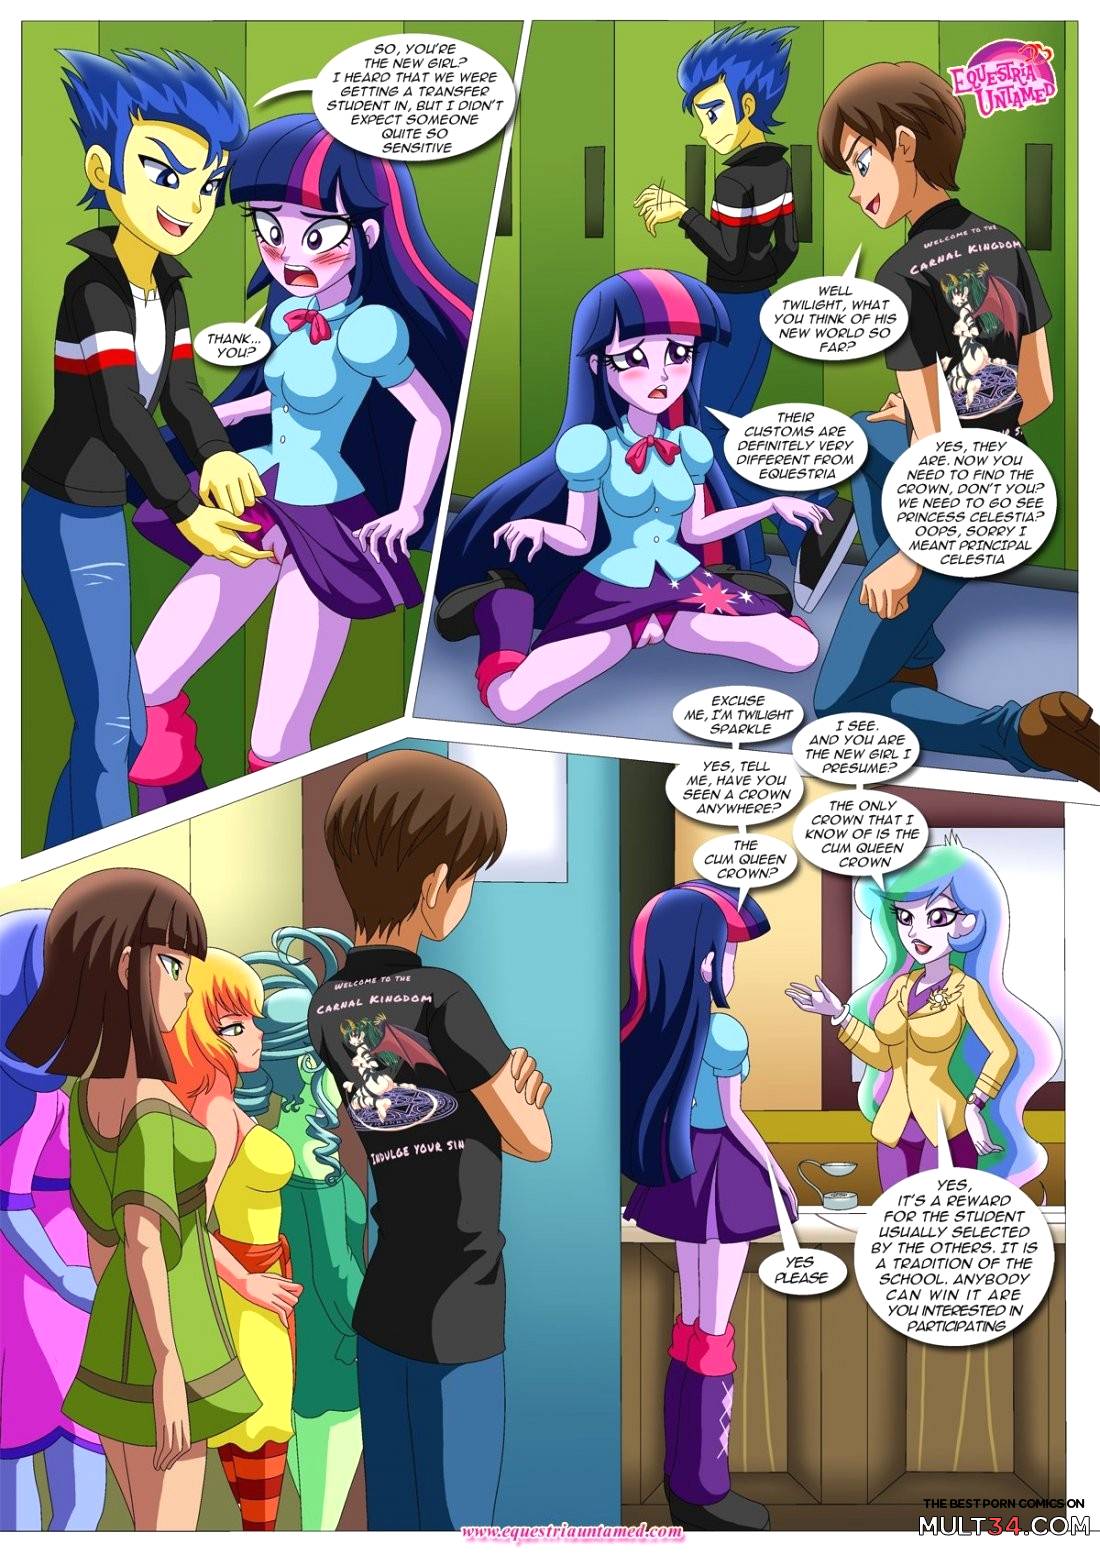 Equestria girls unleashed page 4